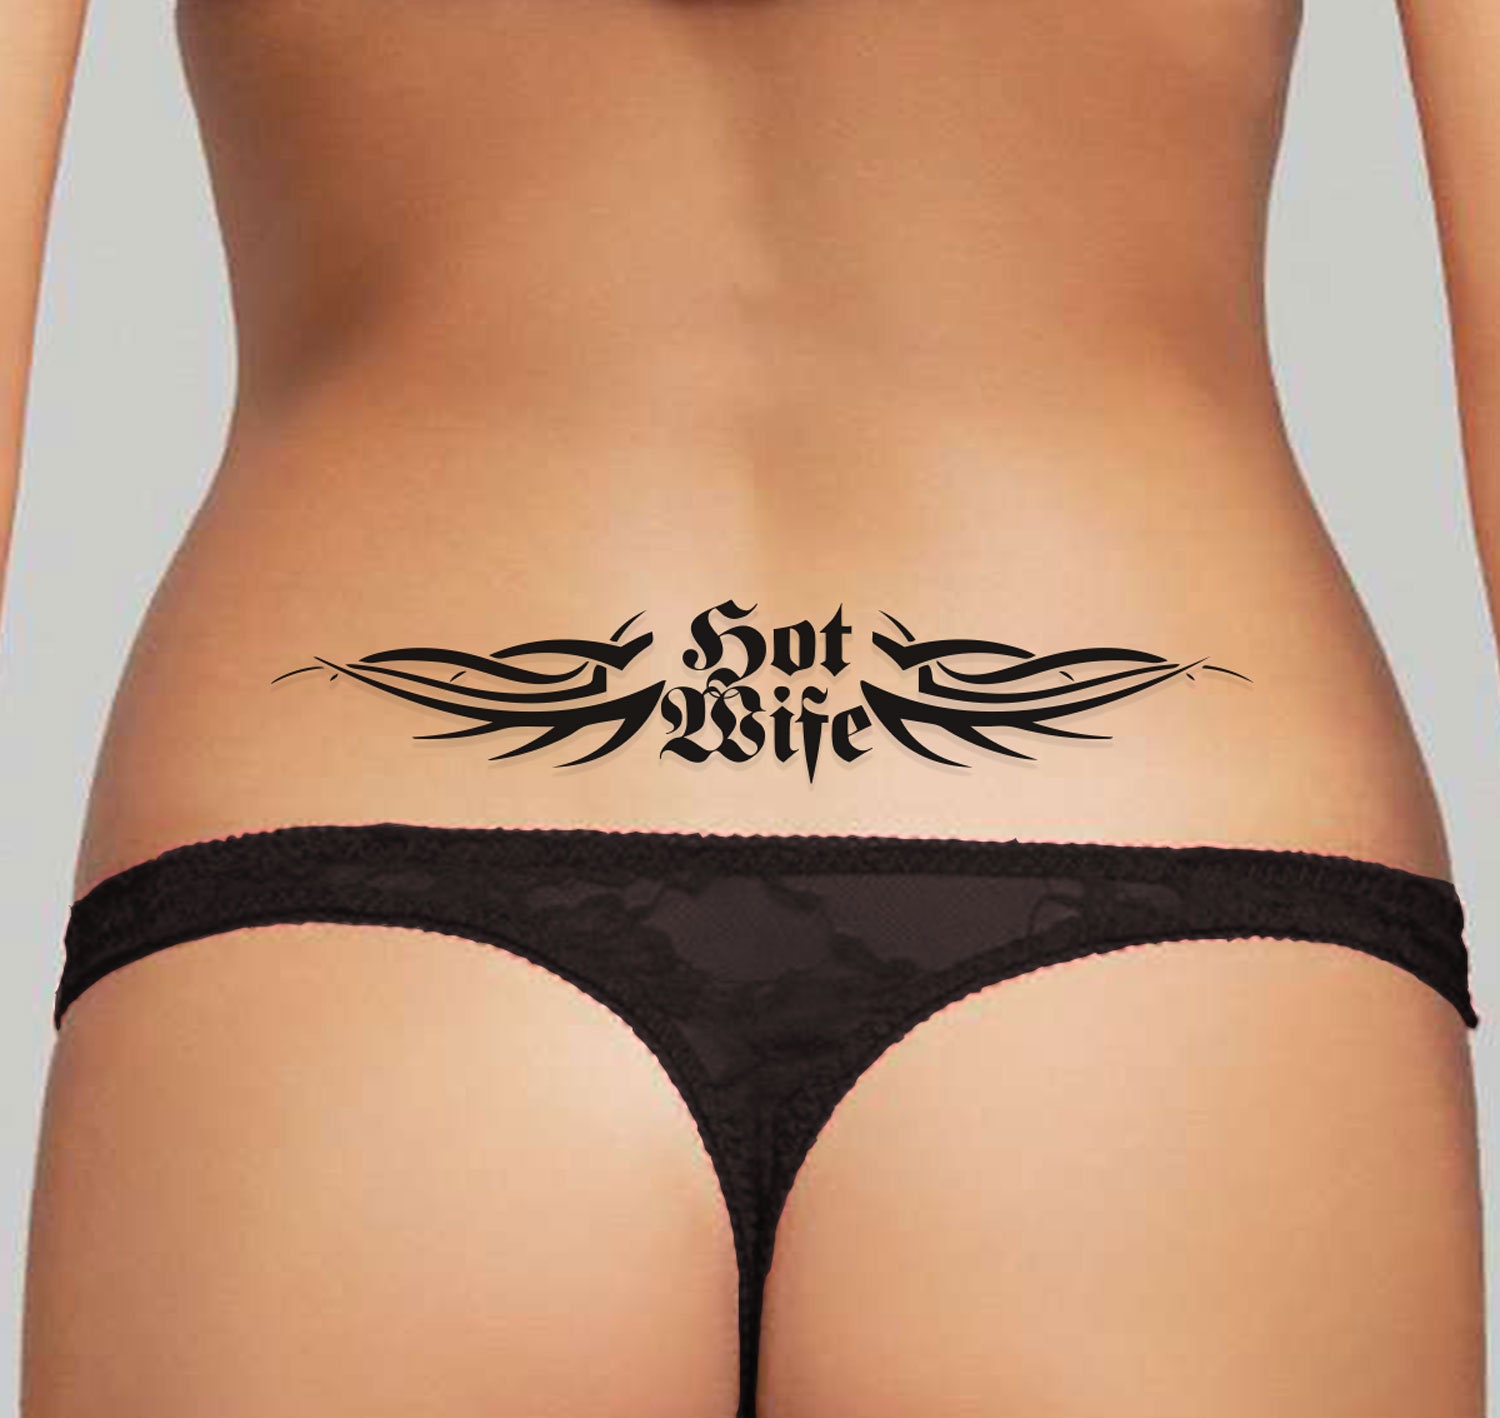 3x Adult Lower Back Temporary Tattoos Tramp Stamps BDSM image image pic